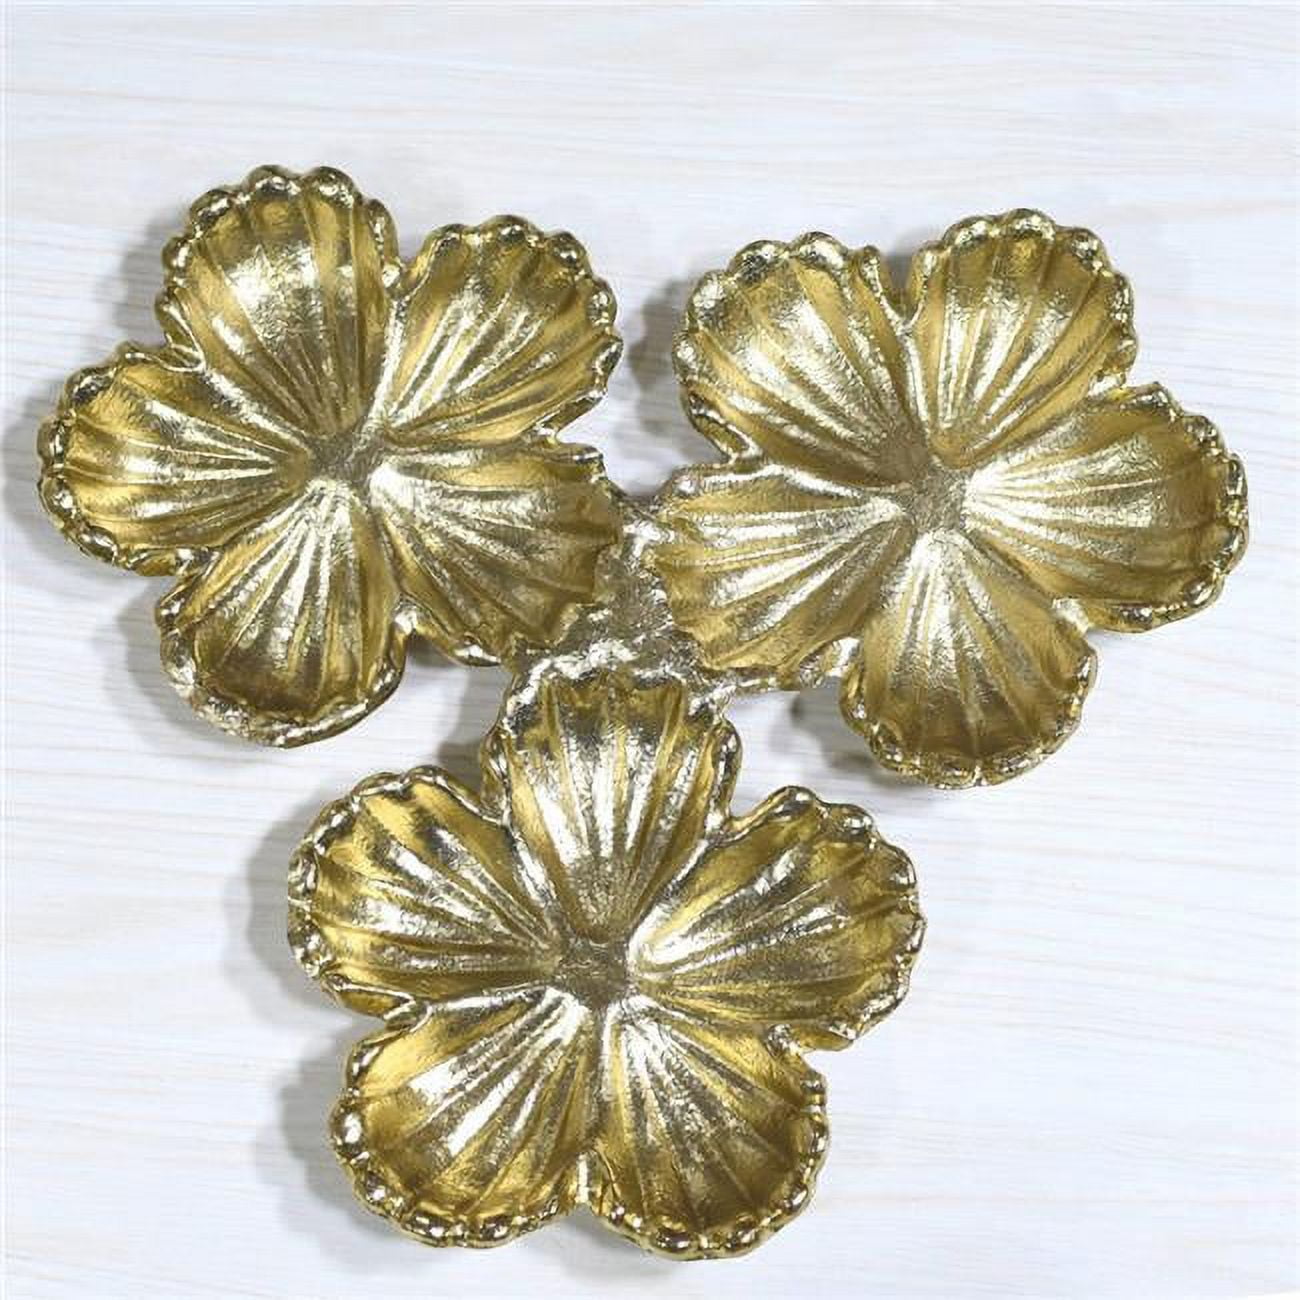 Picture of BBH Homes UBBBVK039AB2020SC2HS 8.26 x 8.26 x 0.98 in. Handmade Gold Coated Decorative Aluminum Tray